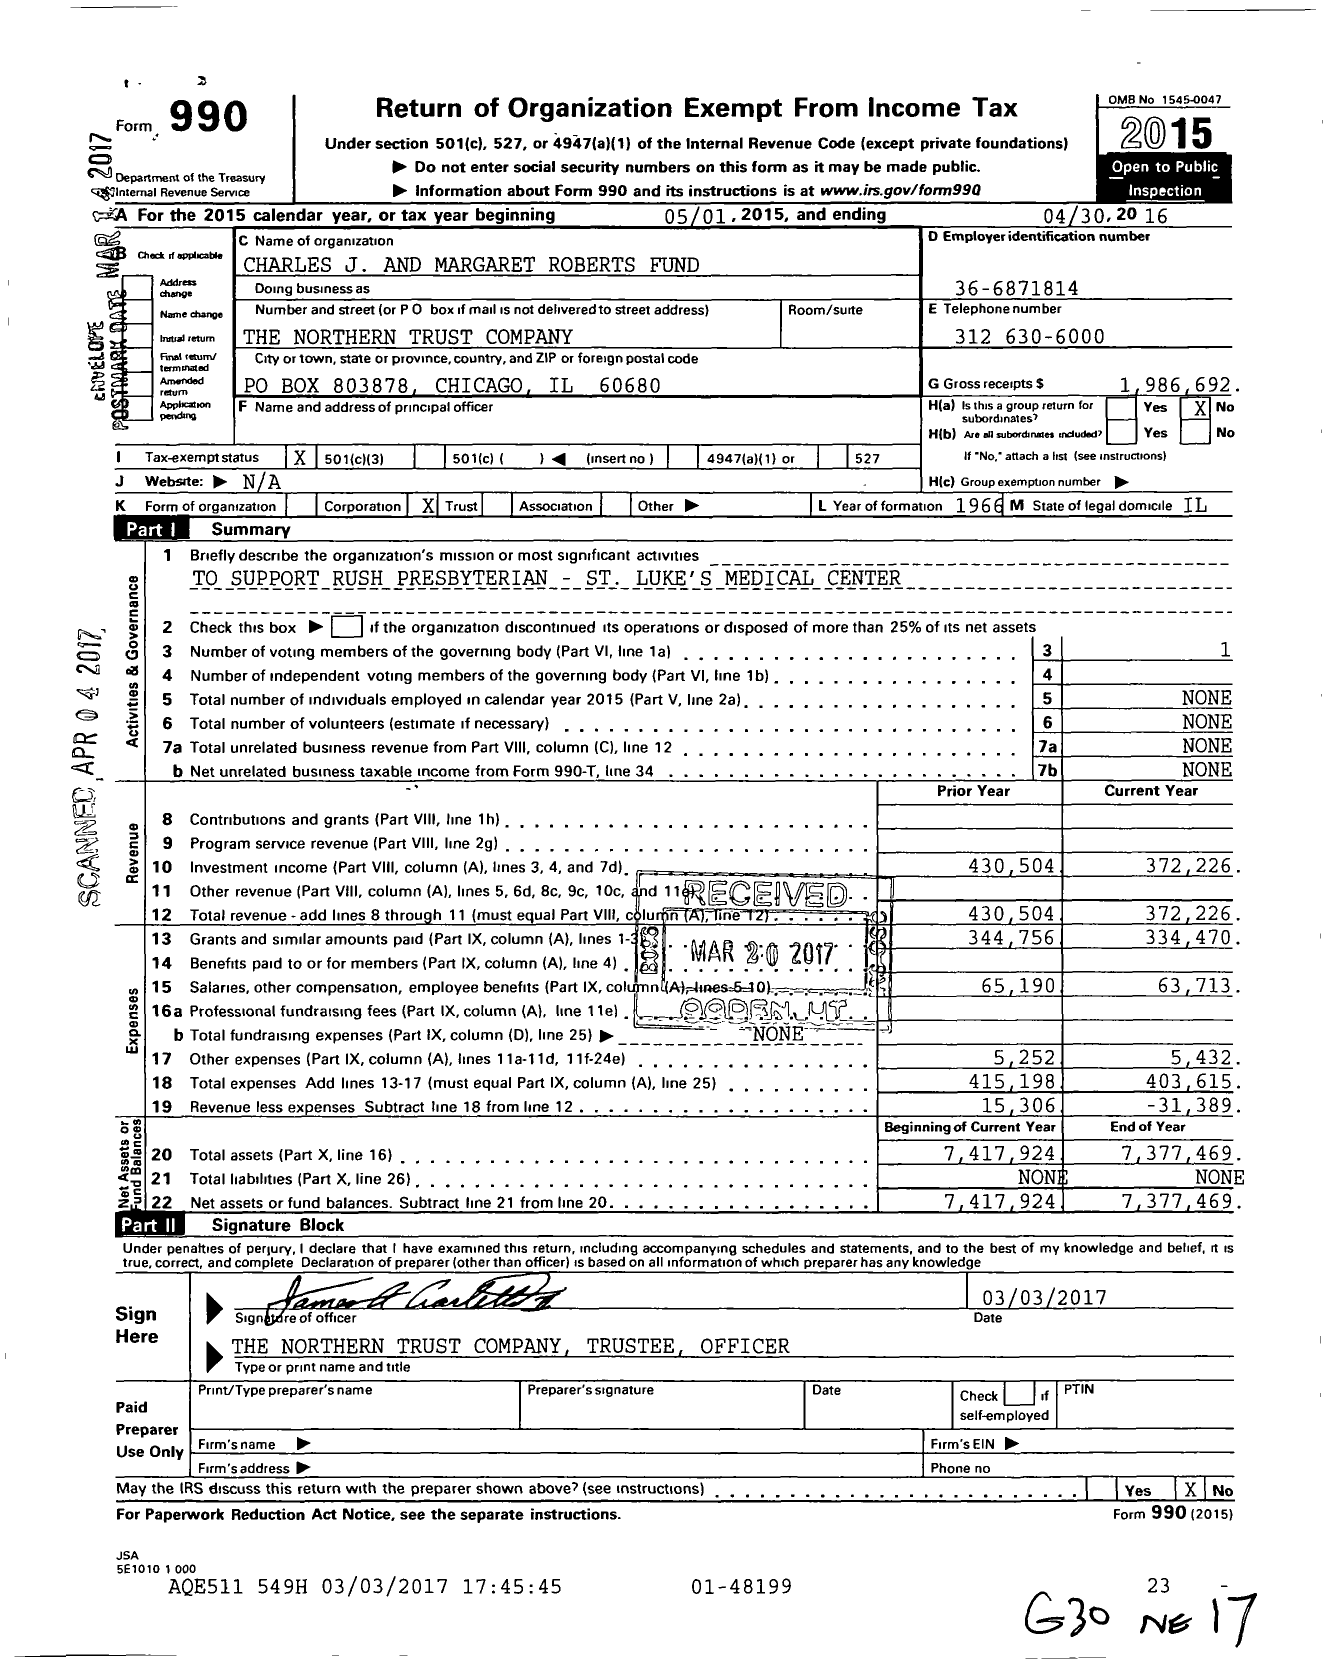 Image of first page of 2015 Form 990 for Charles J and Margaret Roberts Fund